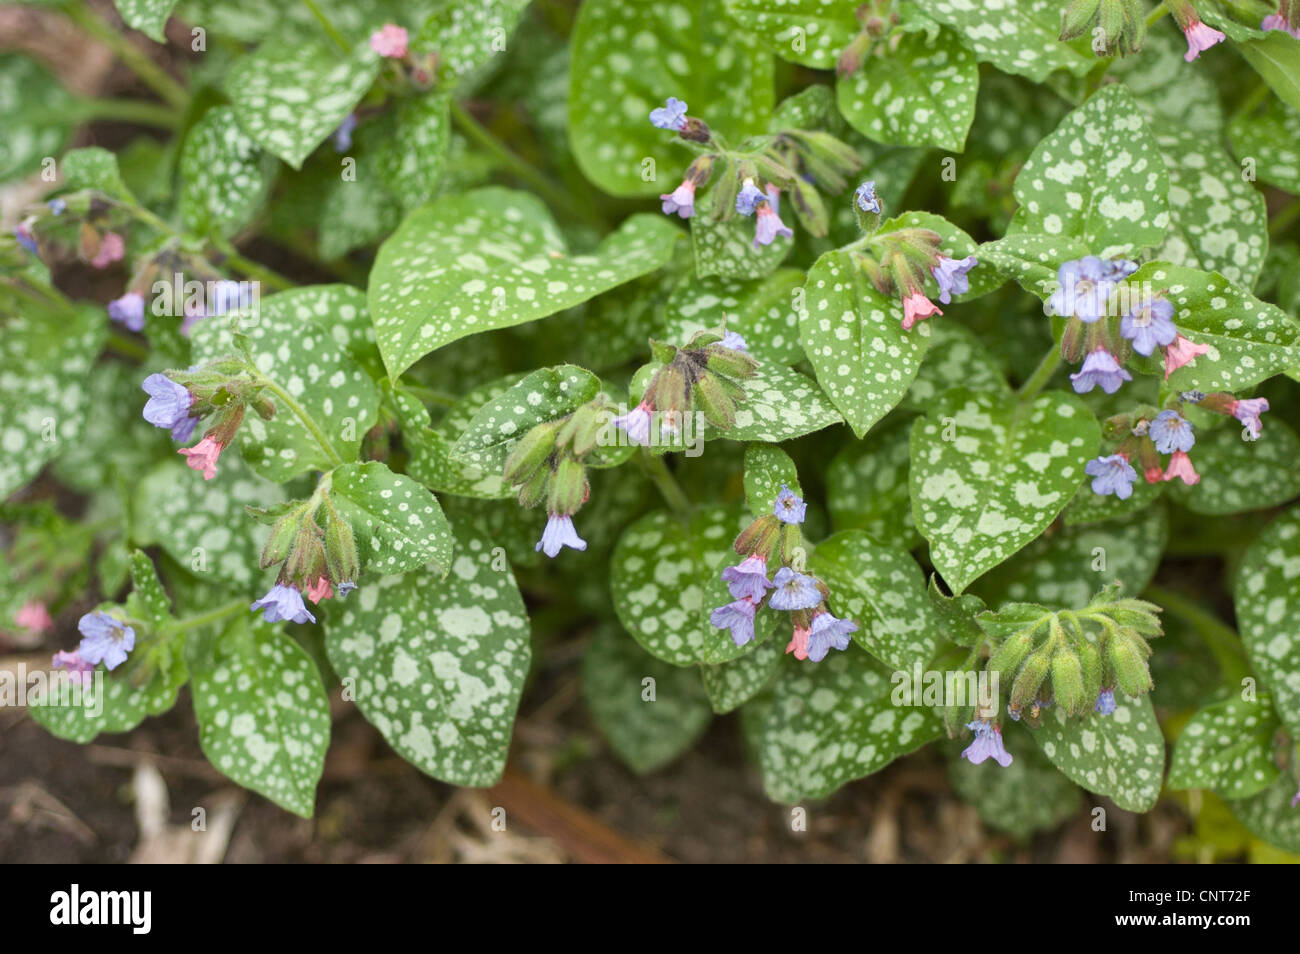 Blue and pink flowers of Pulmonaria officinalis,  Common Lungwort, Our Lady's Milk Drops, Boraginaceae Stock Photo